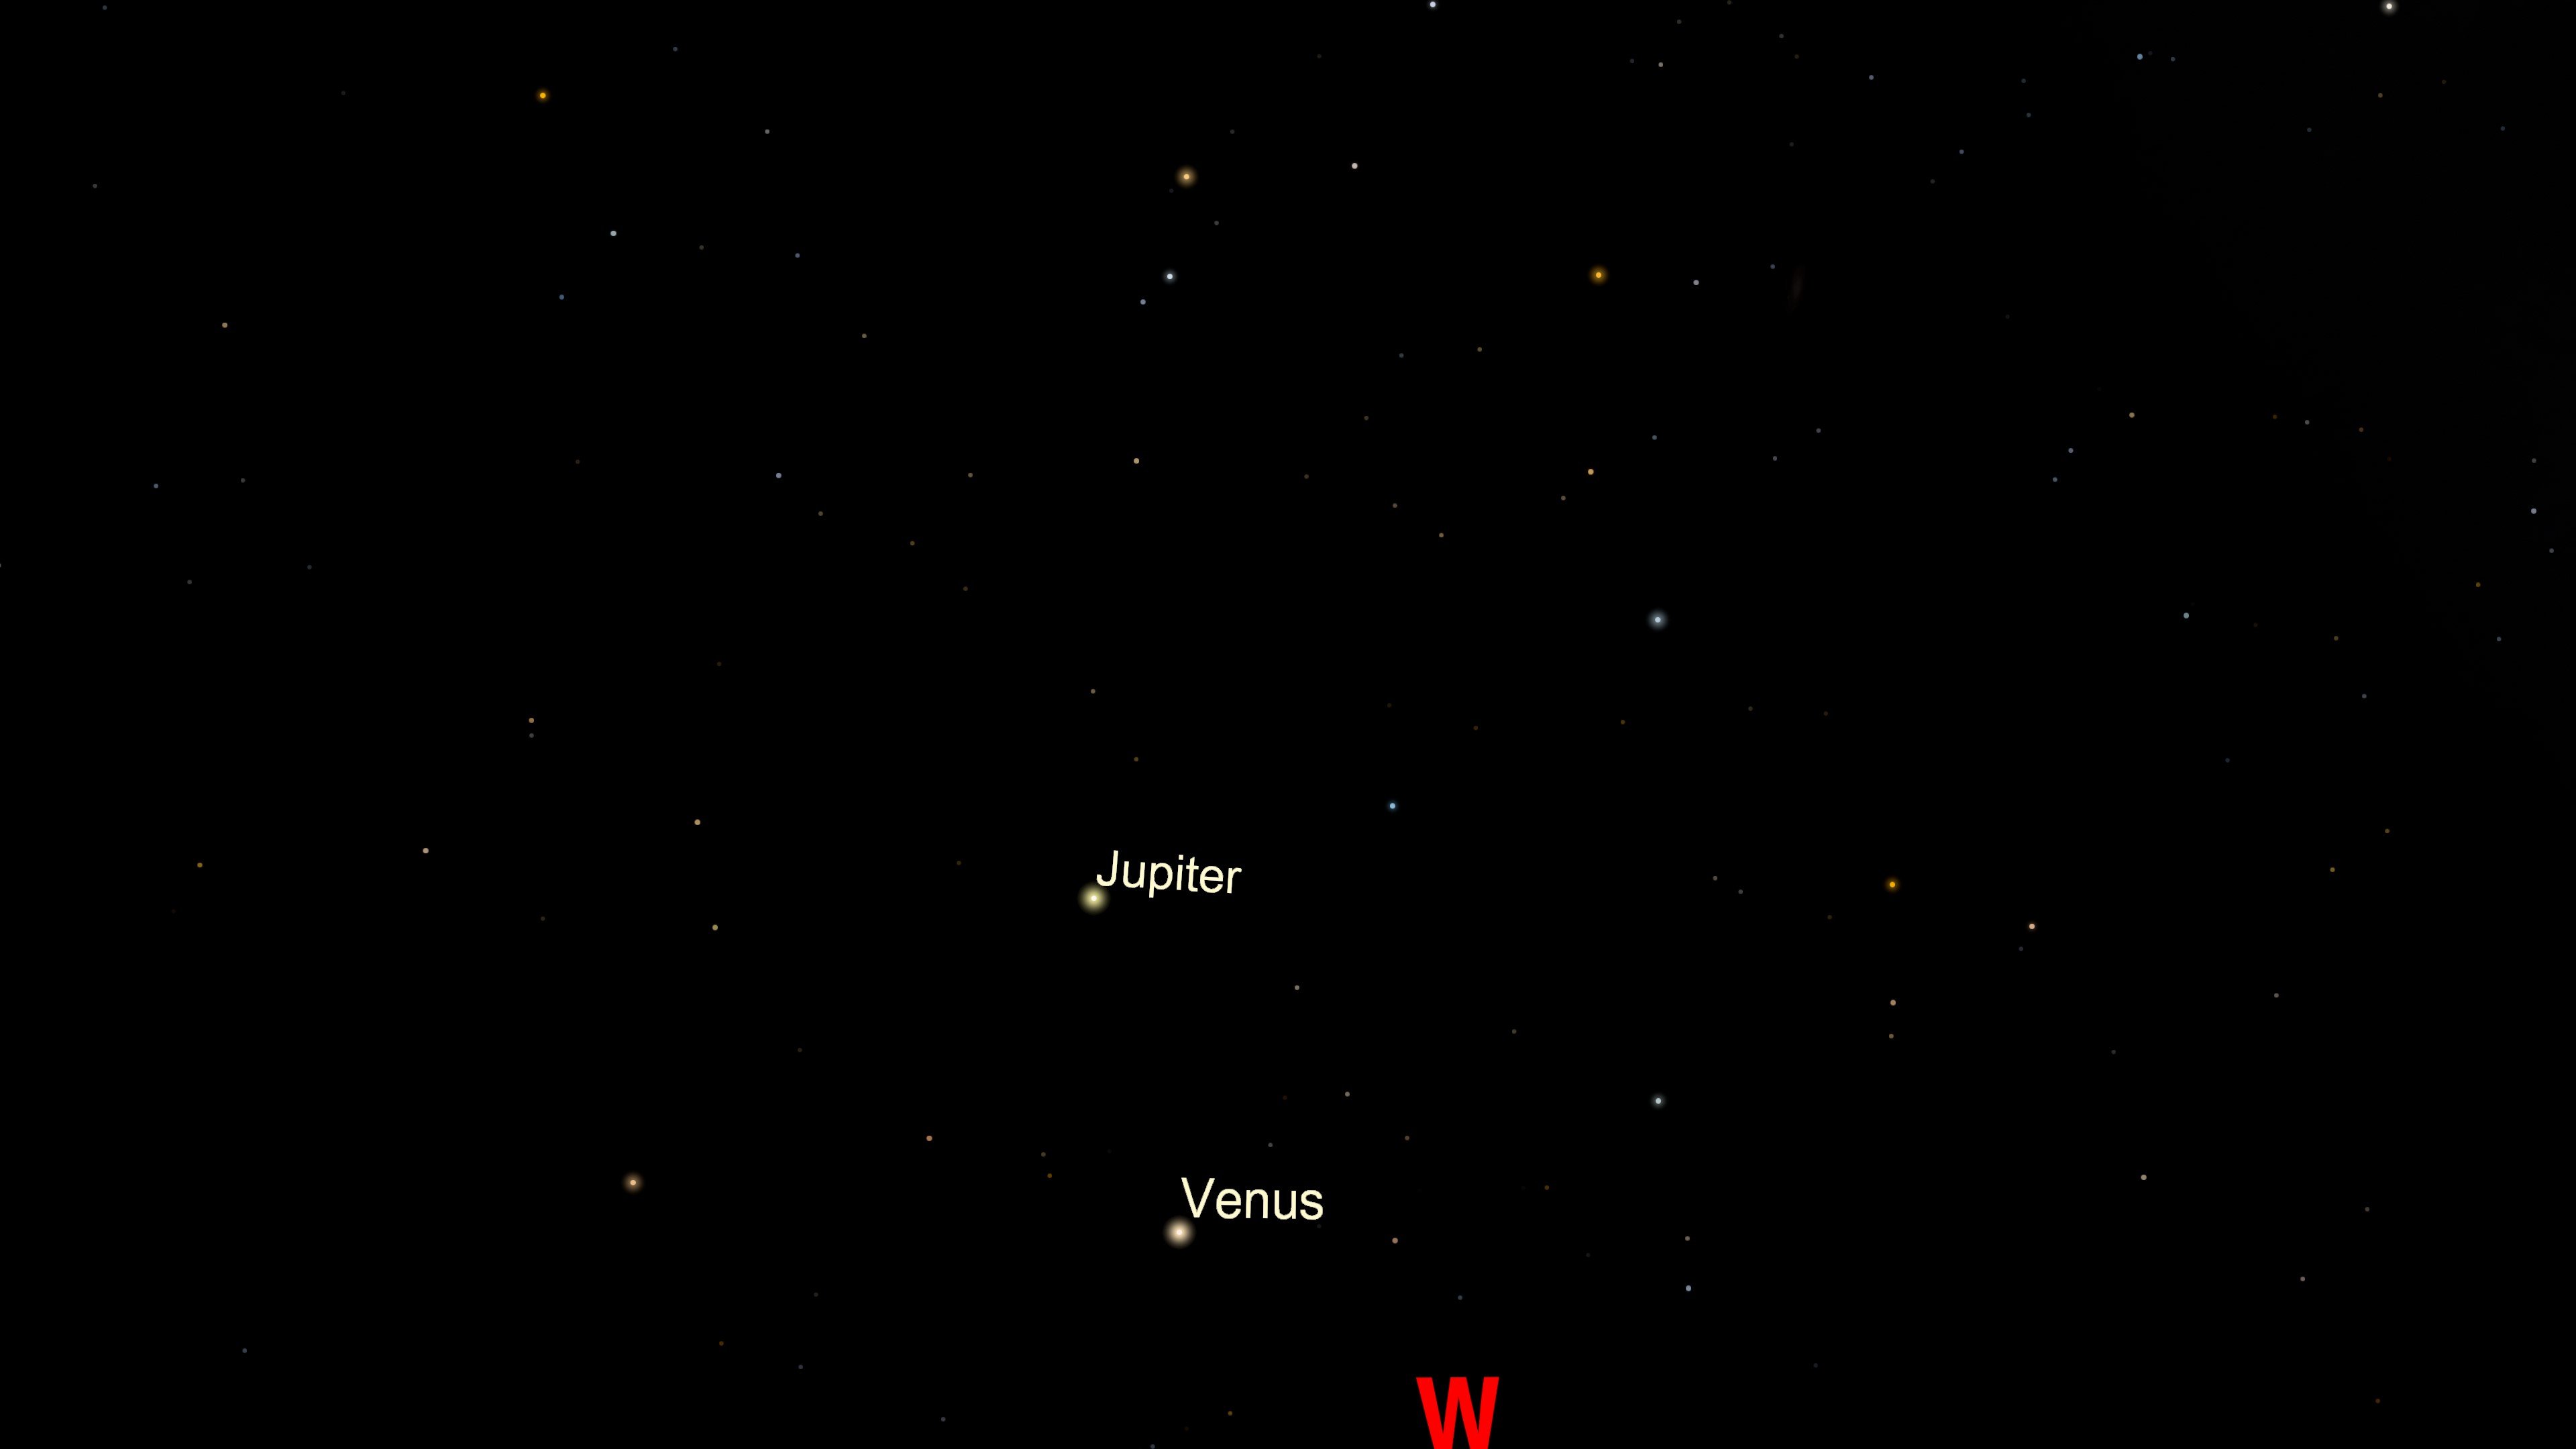 Venus and Neptune are located on the same part of the sky just after sunset on February 15.